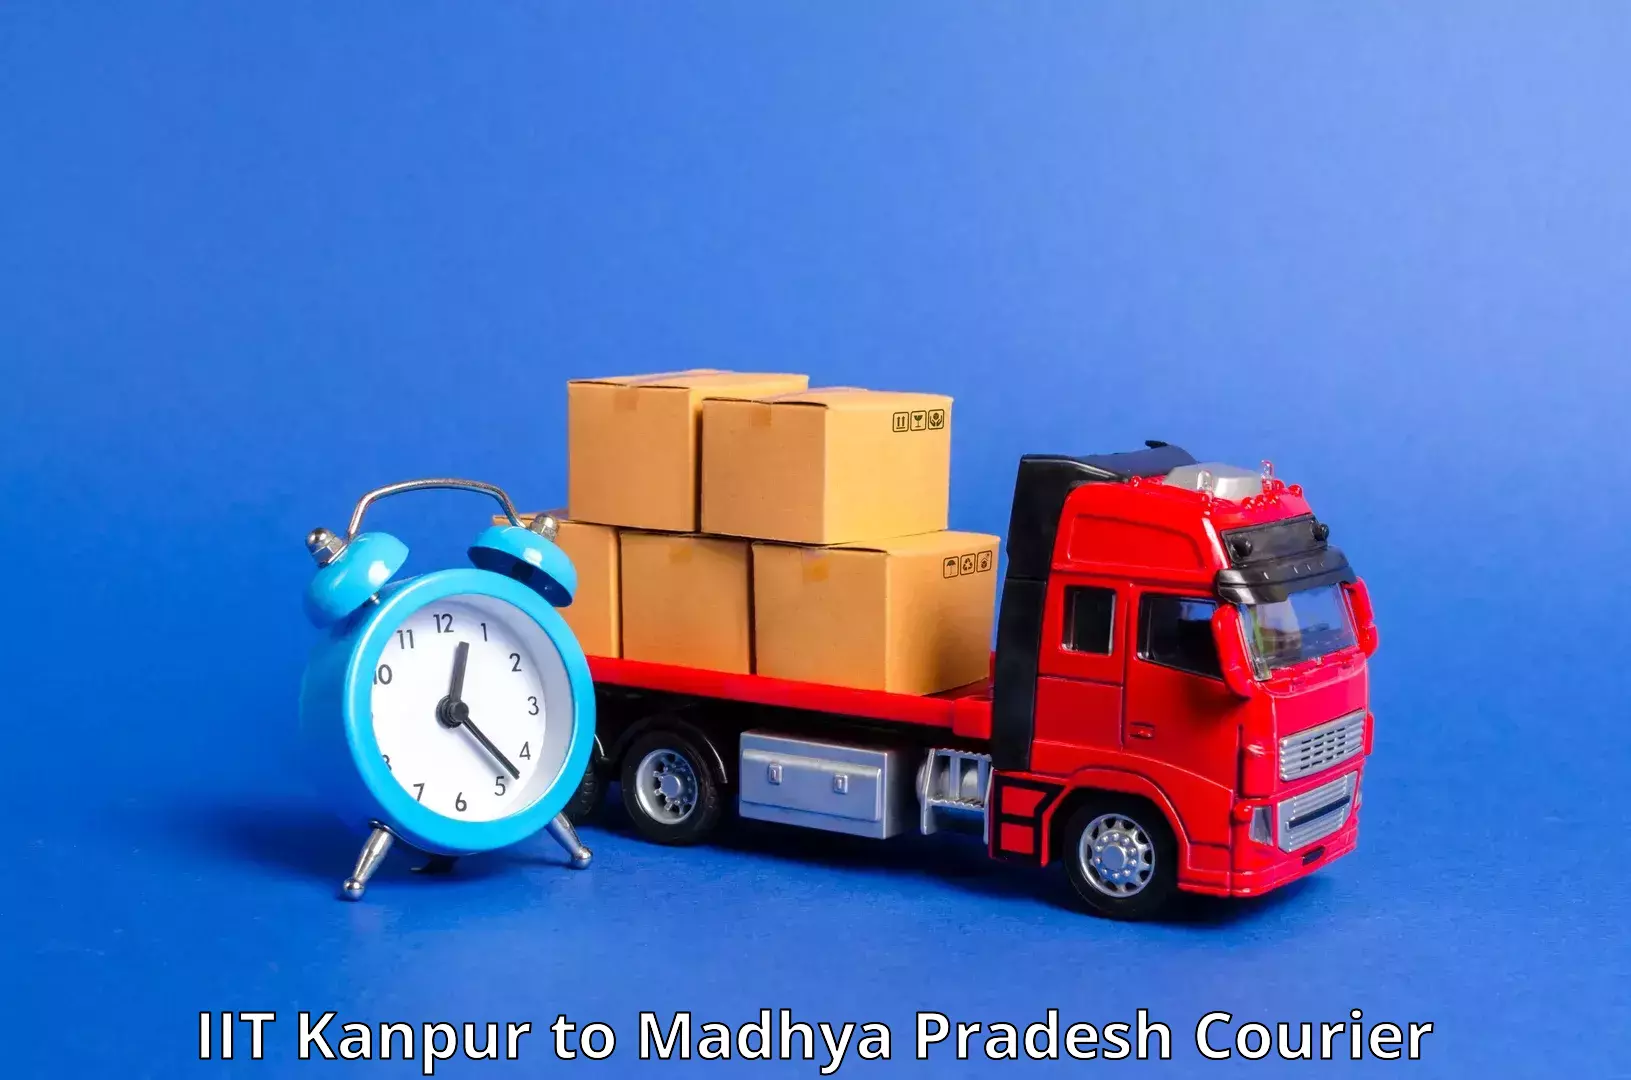 Express mail solutions IIT Kanpur to Khargone